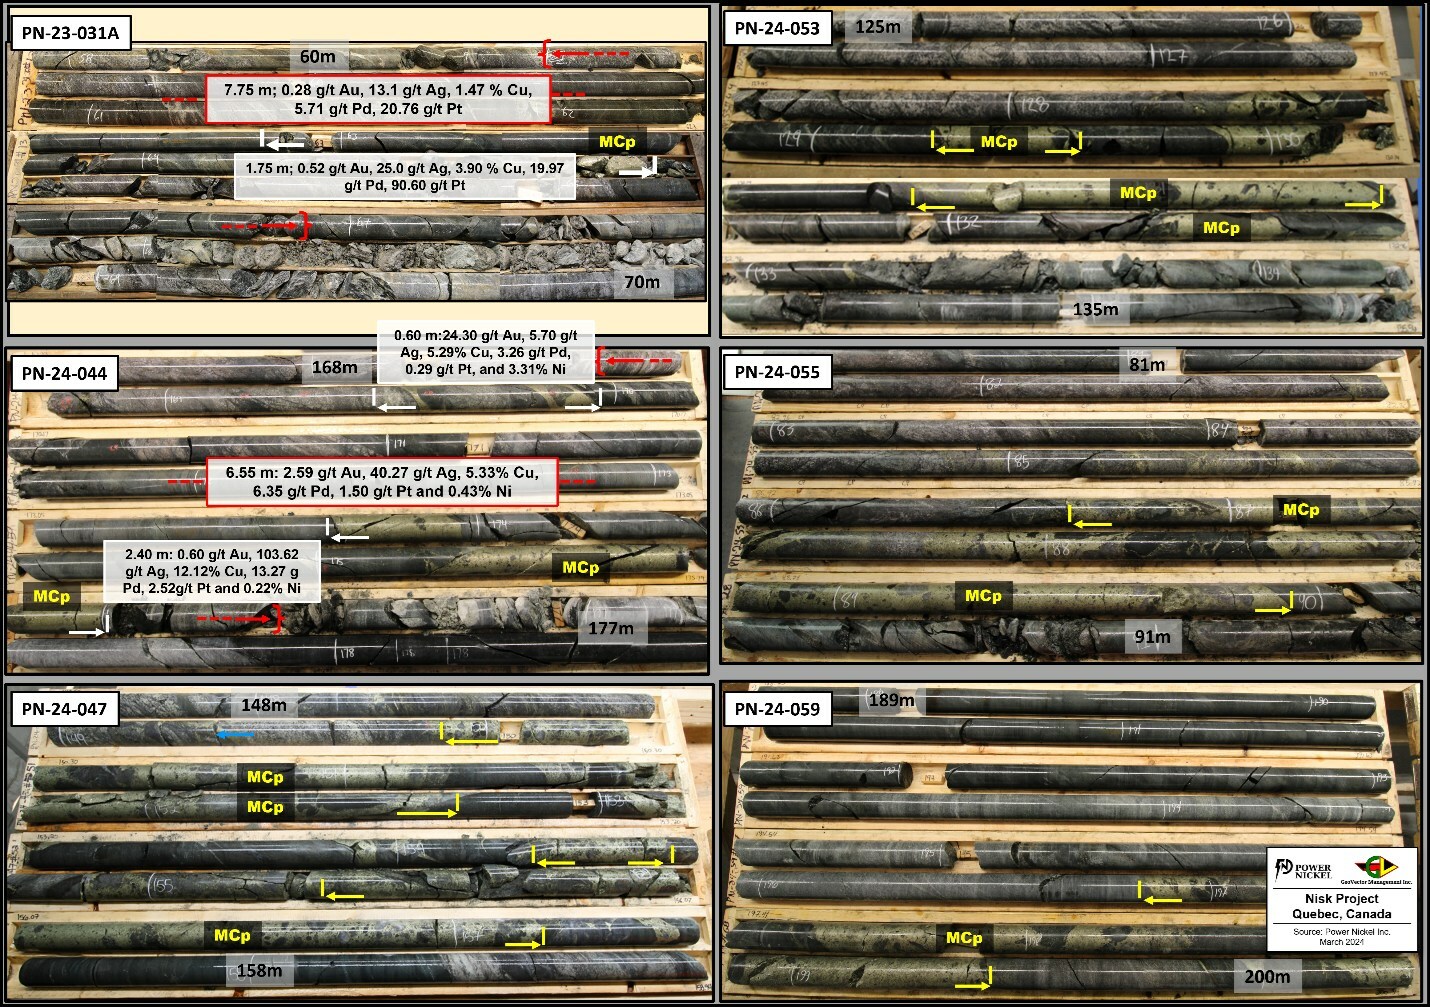 Figure 3: Core pictures showing the relation between observed massive chalcopyrite and grade in both PN-23-031A and PN-24-044, and massive chalcopyrite (MCp) observed in four other recent holes. (CNW Group/Power Nickel Inc.)